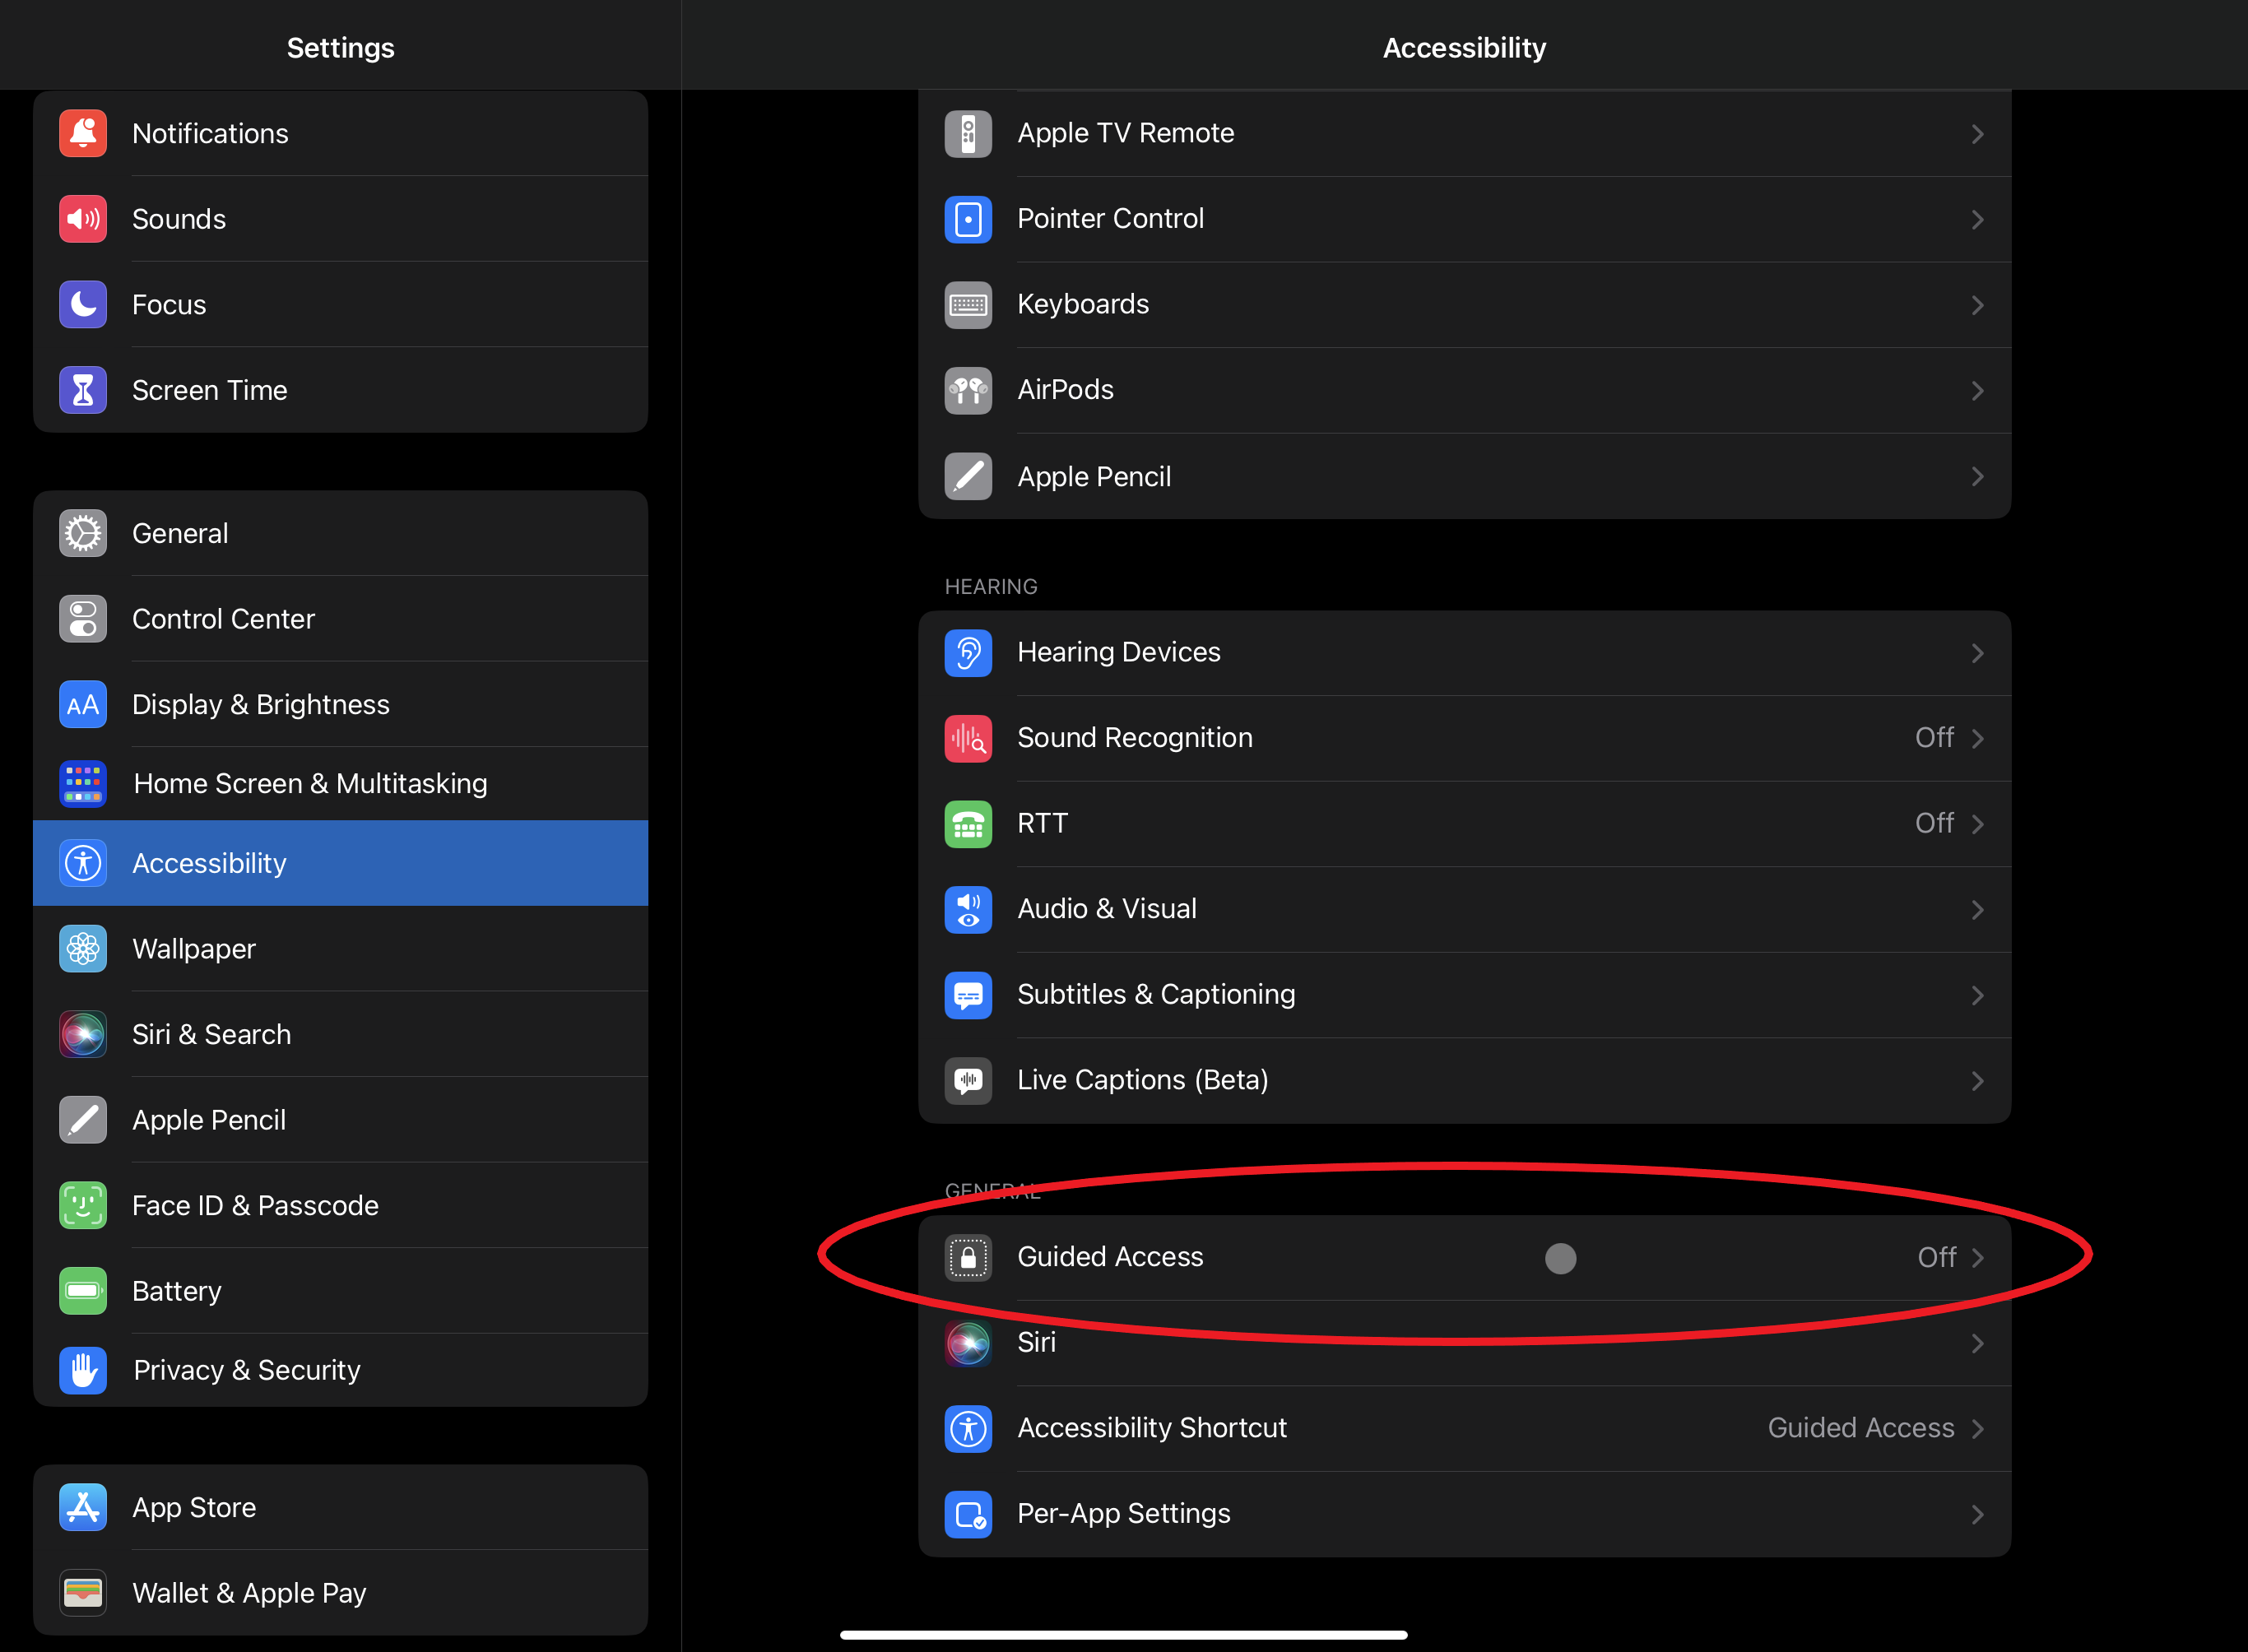 Screenshot showing the Settings menu on the left with the Accessibility option highlighted. On the right is the Accessibility menu with Guided Access circled in red.